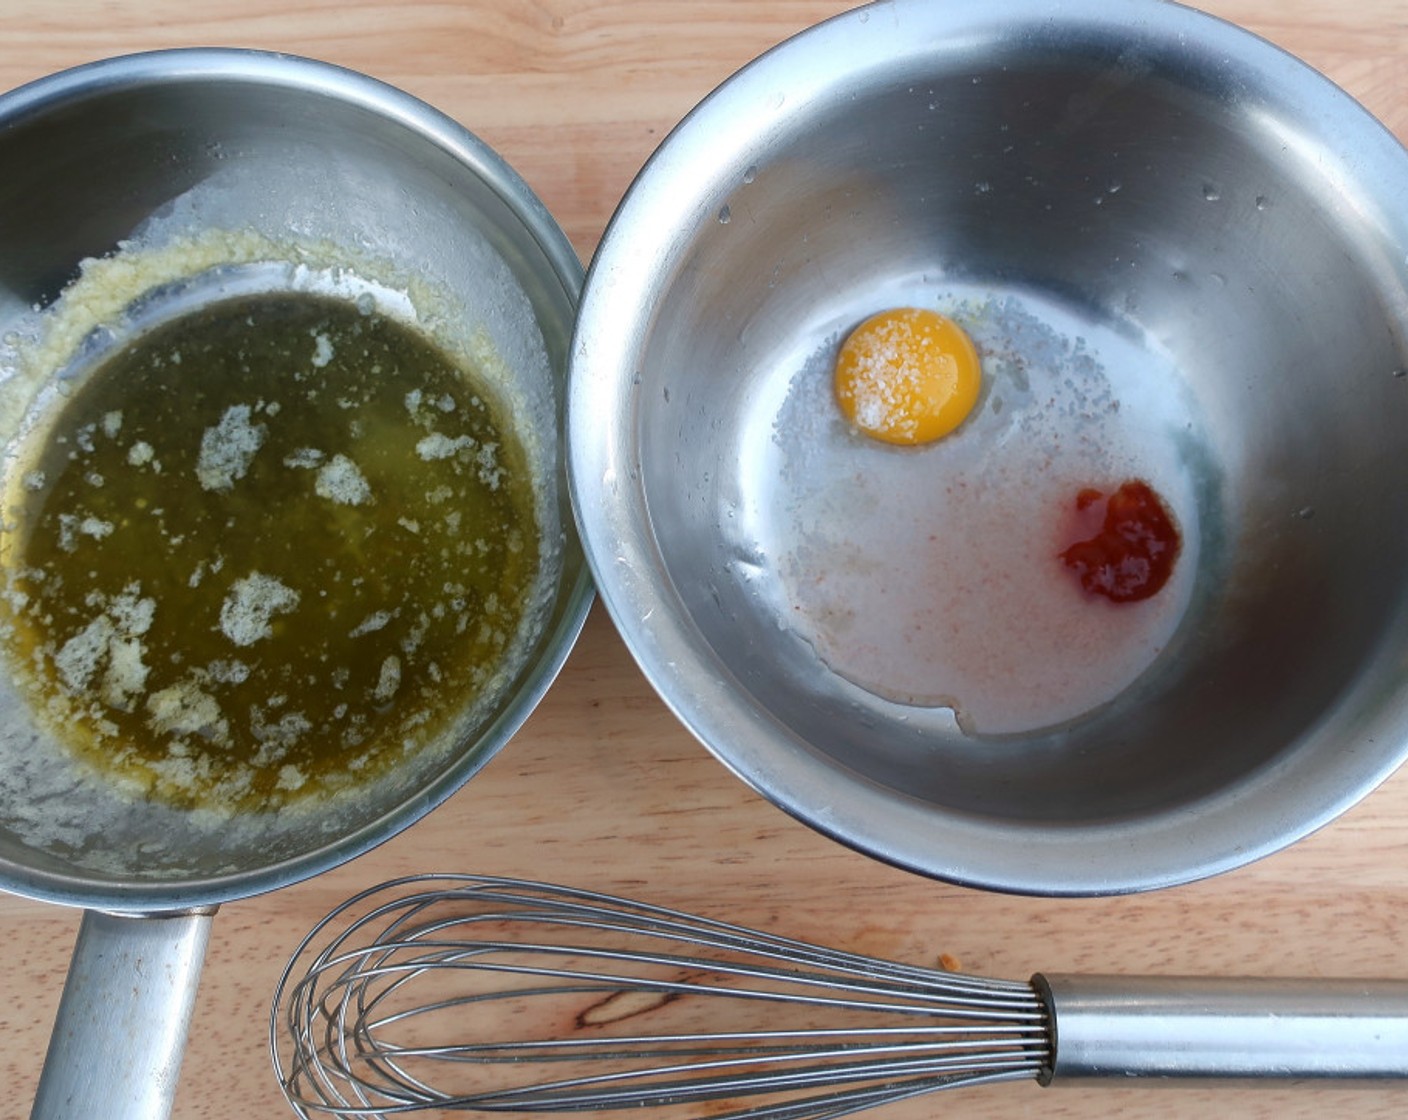 step 7 In a mixing bowl, whisk the Egg (1), Water (1 Tbsp), juice from Lemon (1), Sriracha (to taste), and Kosher Salt (to taste) in a water bath until the egg mixture becomes creamy.